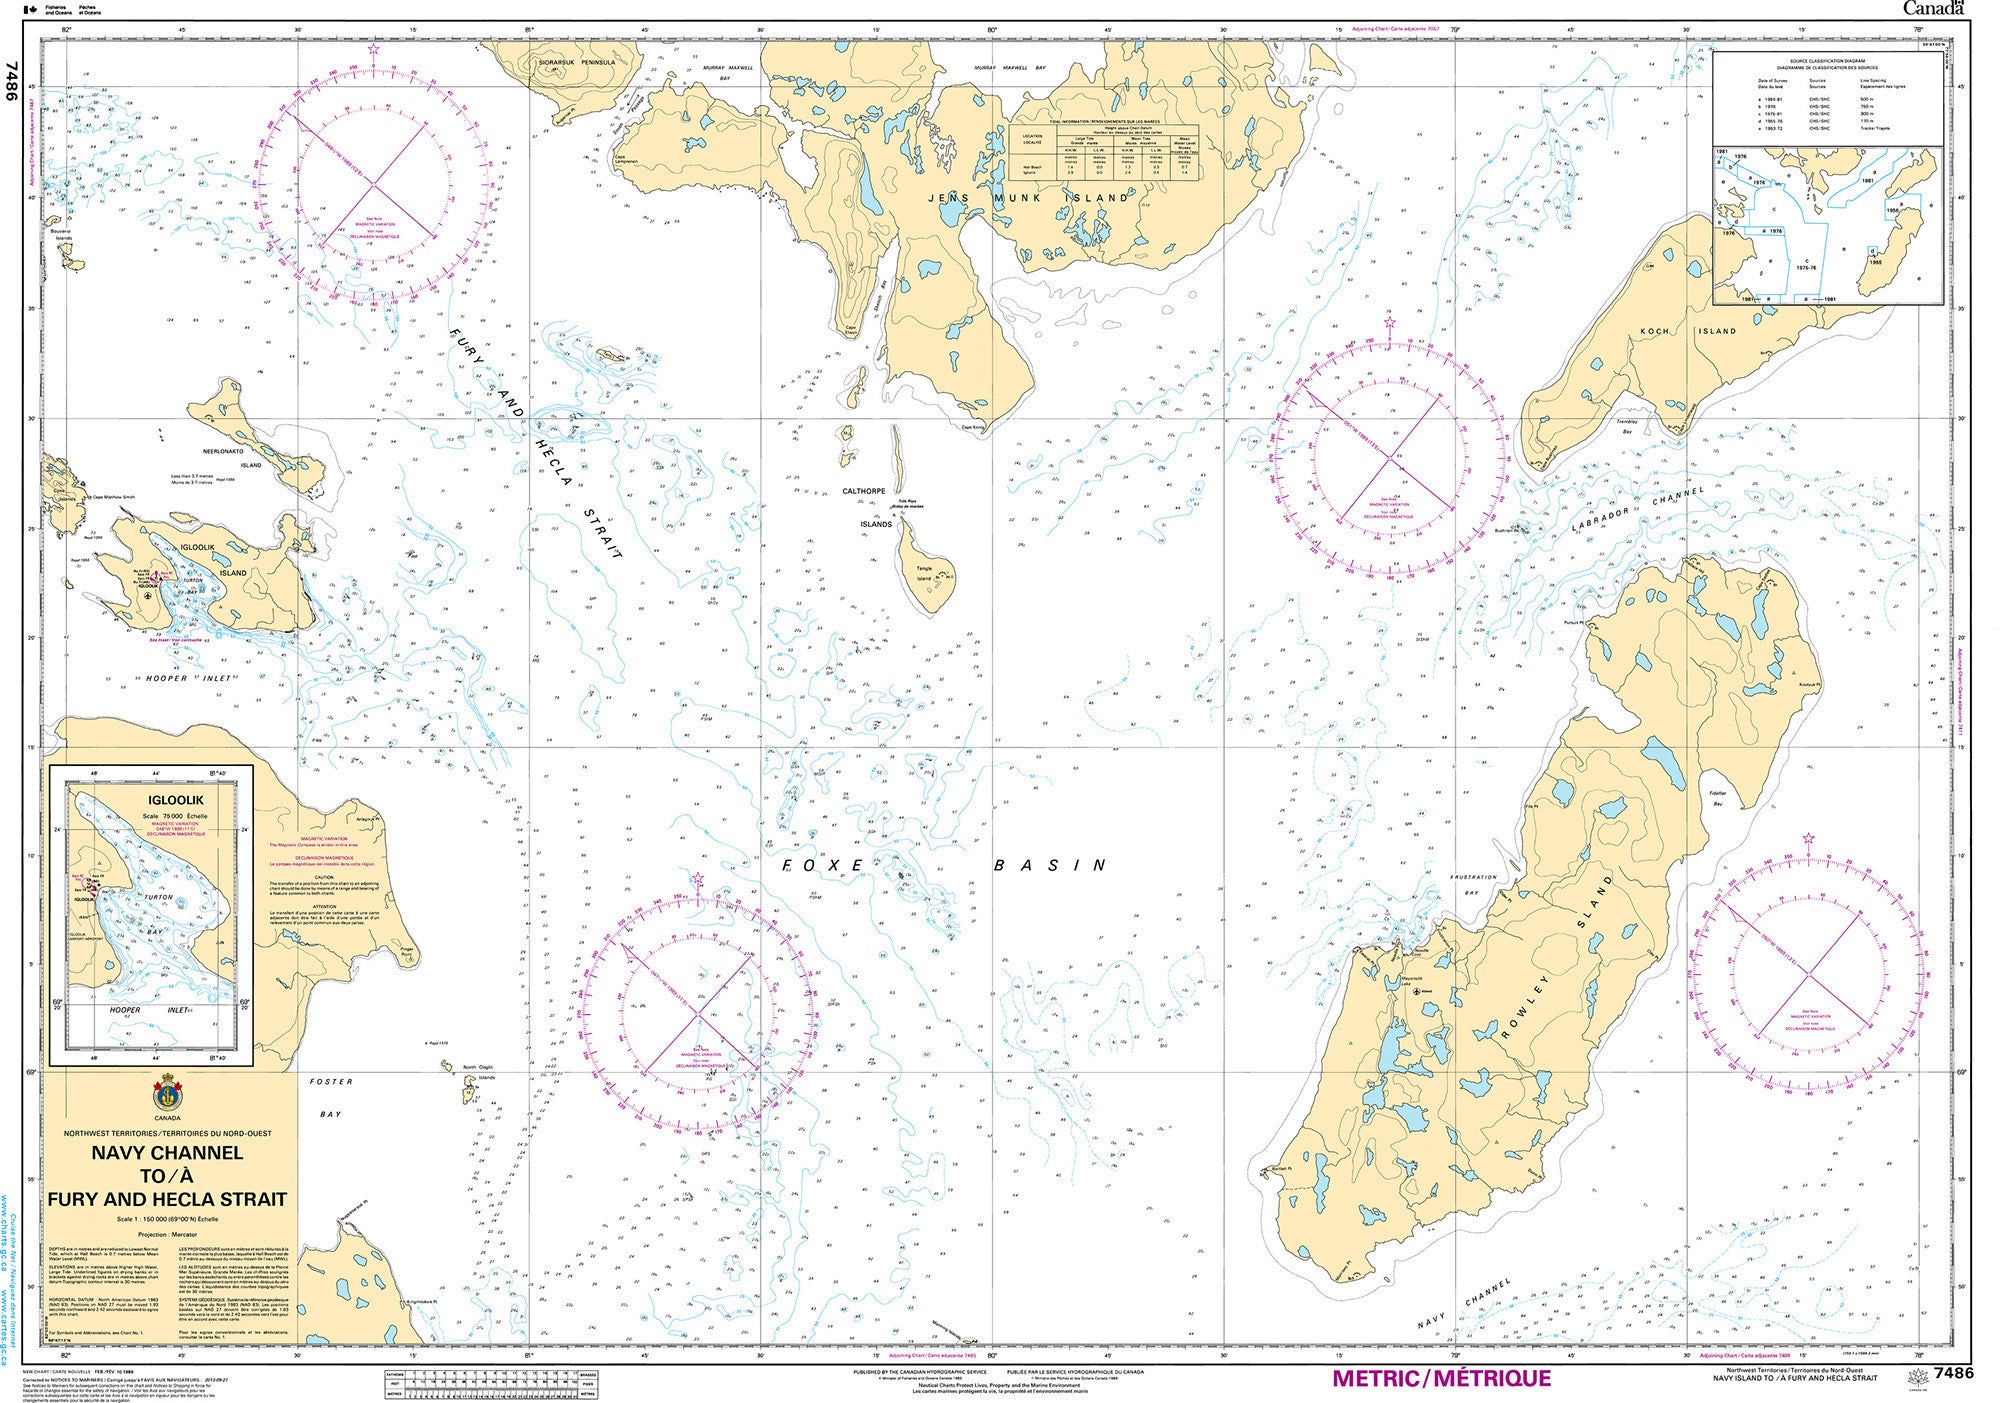 Canadian Hydrographic Service Nautical Chart CHS7486: Navy Channel to/à Fury and Hecla Strait